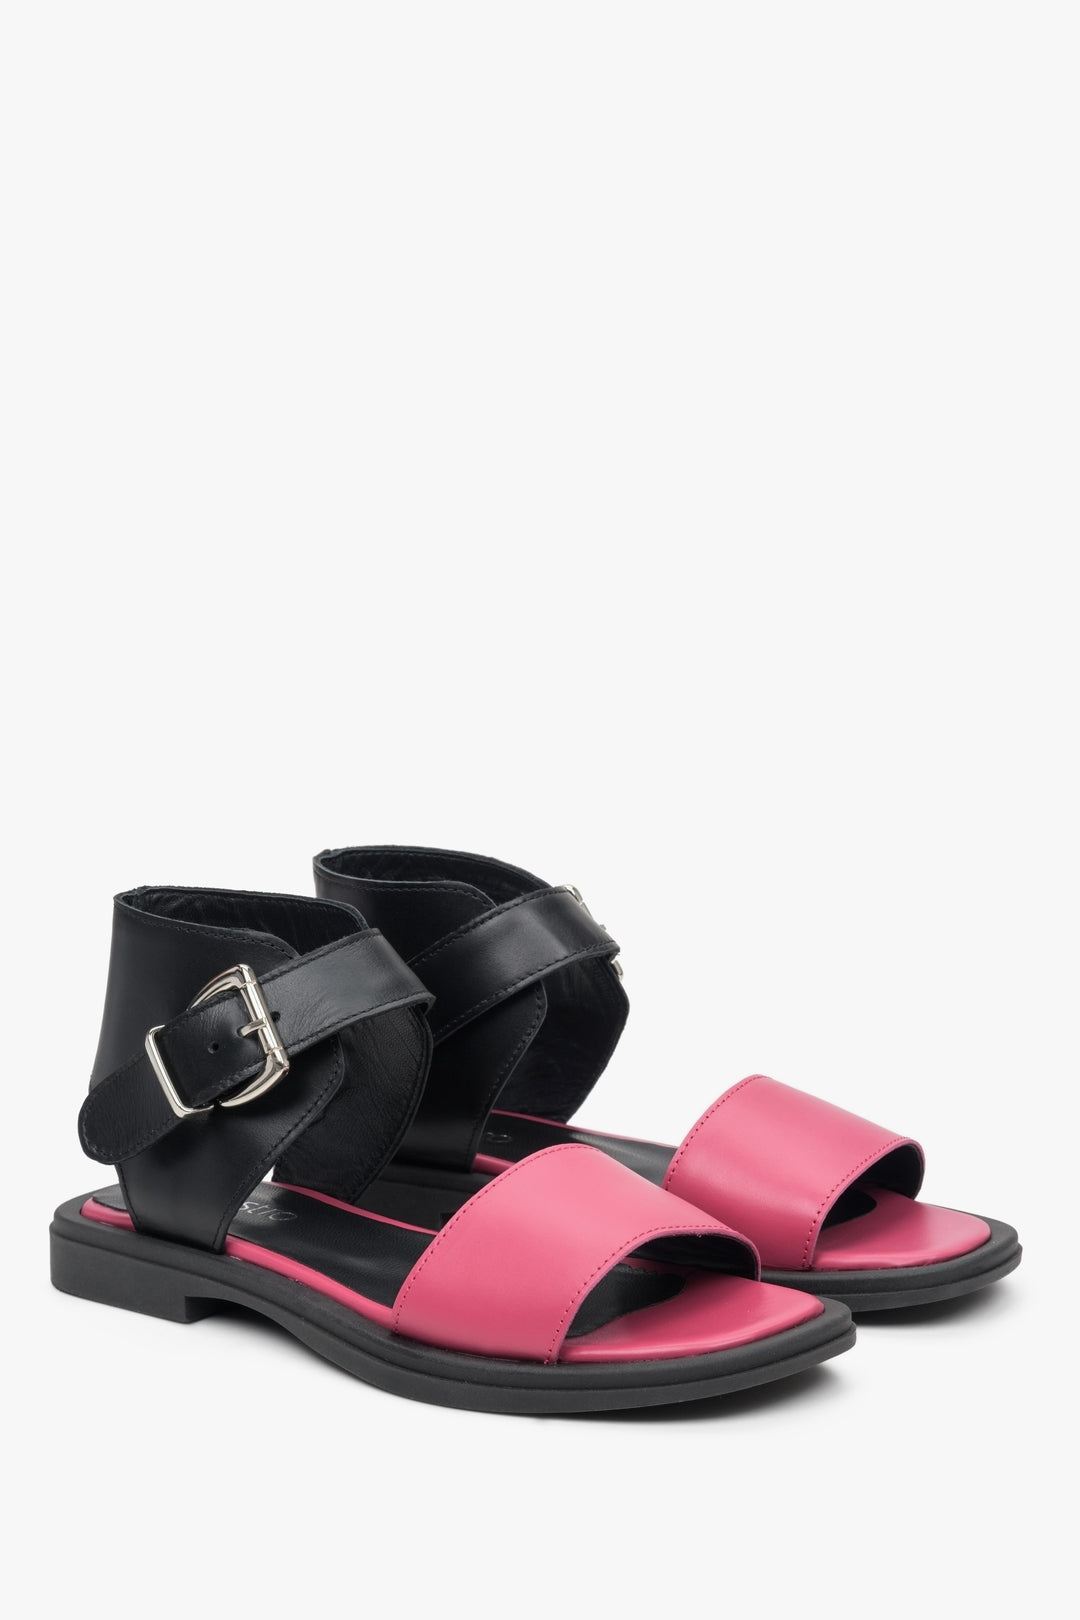 Black and pink women's flat sandals made of natural leather Estro.